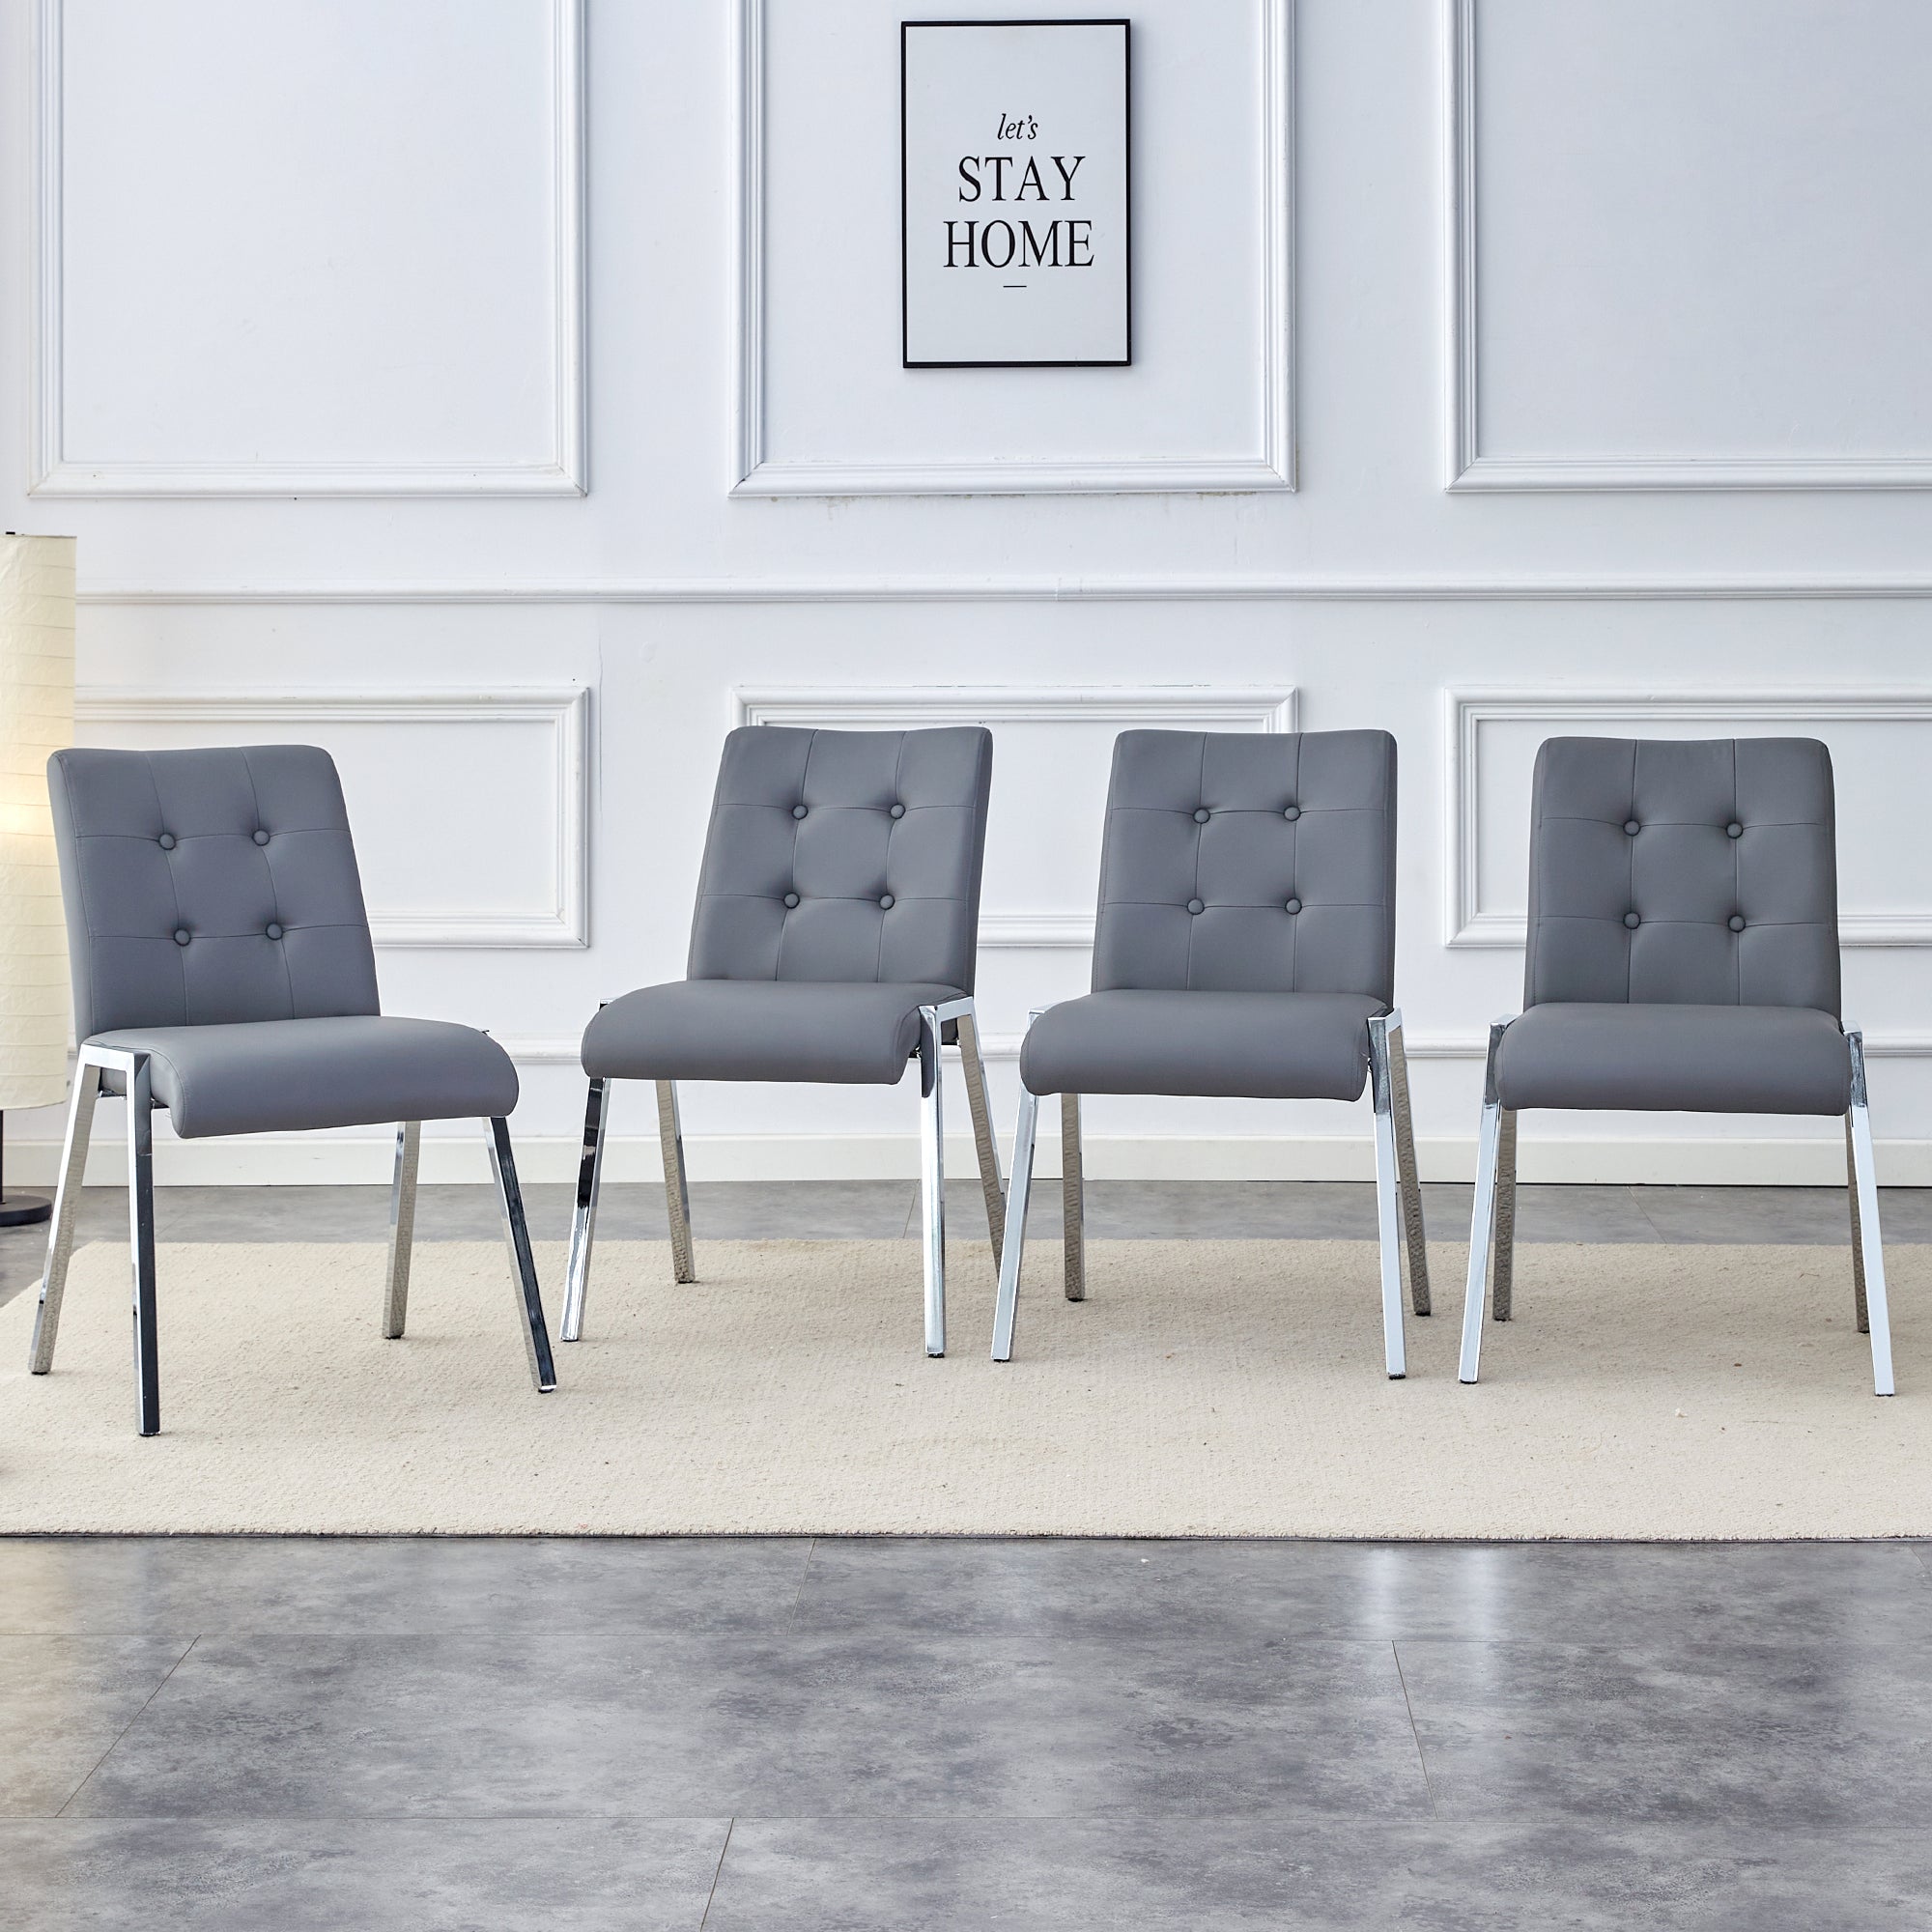 Set of 4pc Gray Faux Leather Tufted Dining Chairs with Chromed Legs